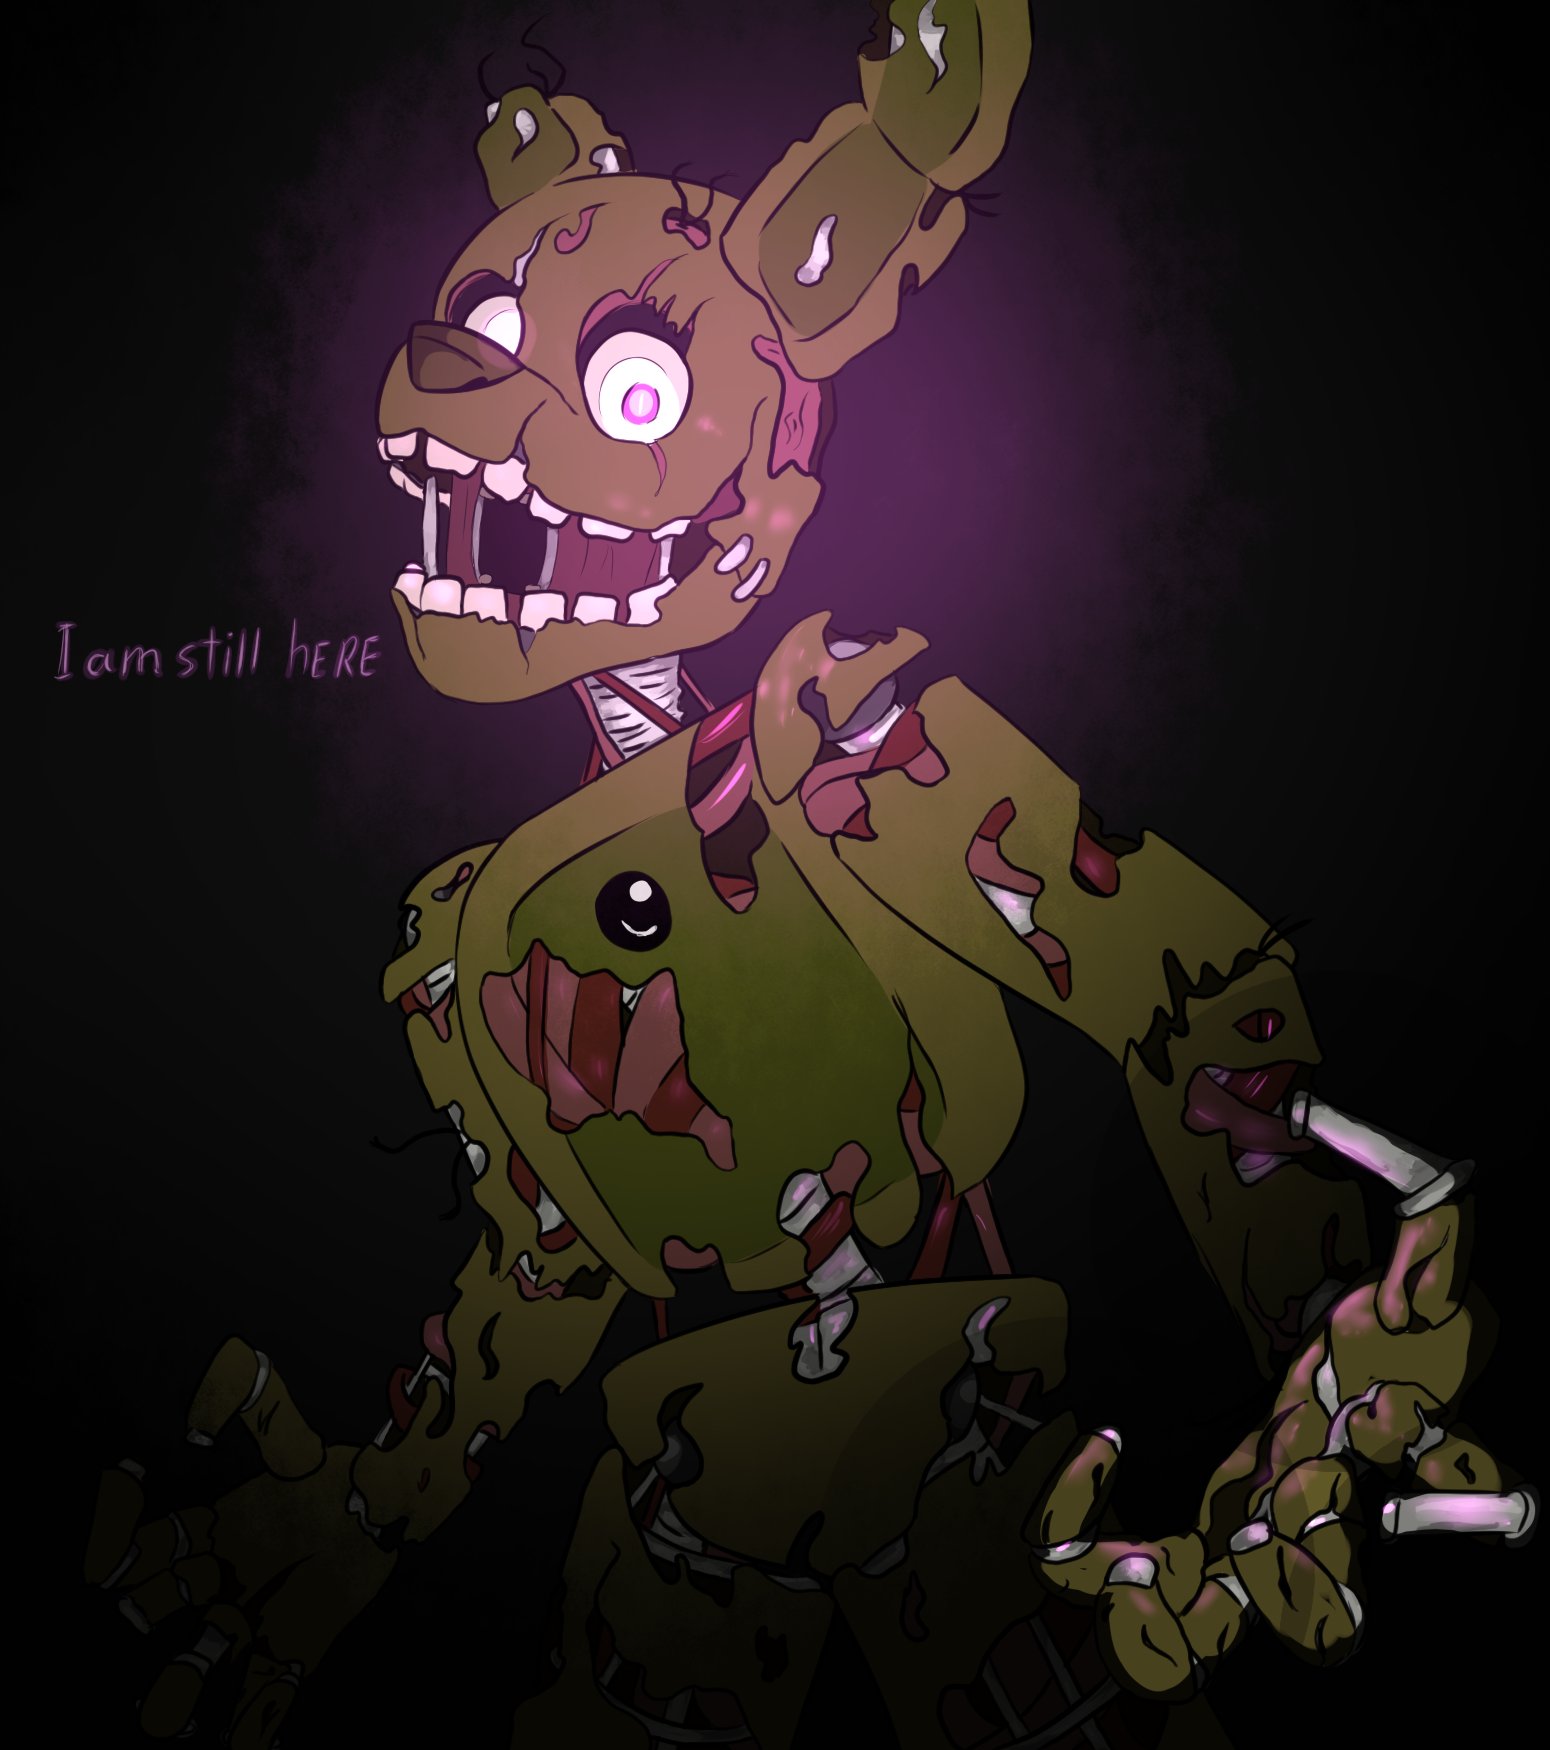 release of Fnaf 3, but I like this part.
#FiveNightsAtFreddys #Five...